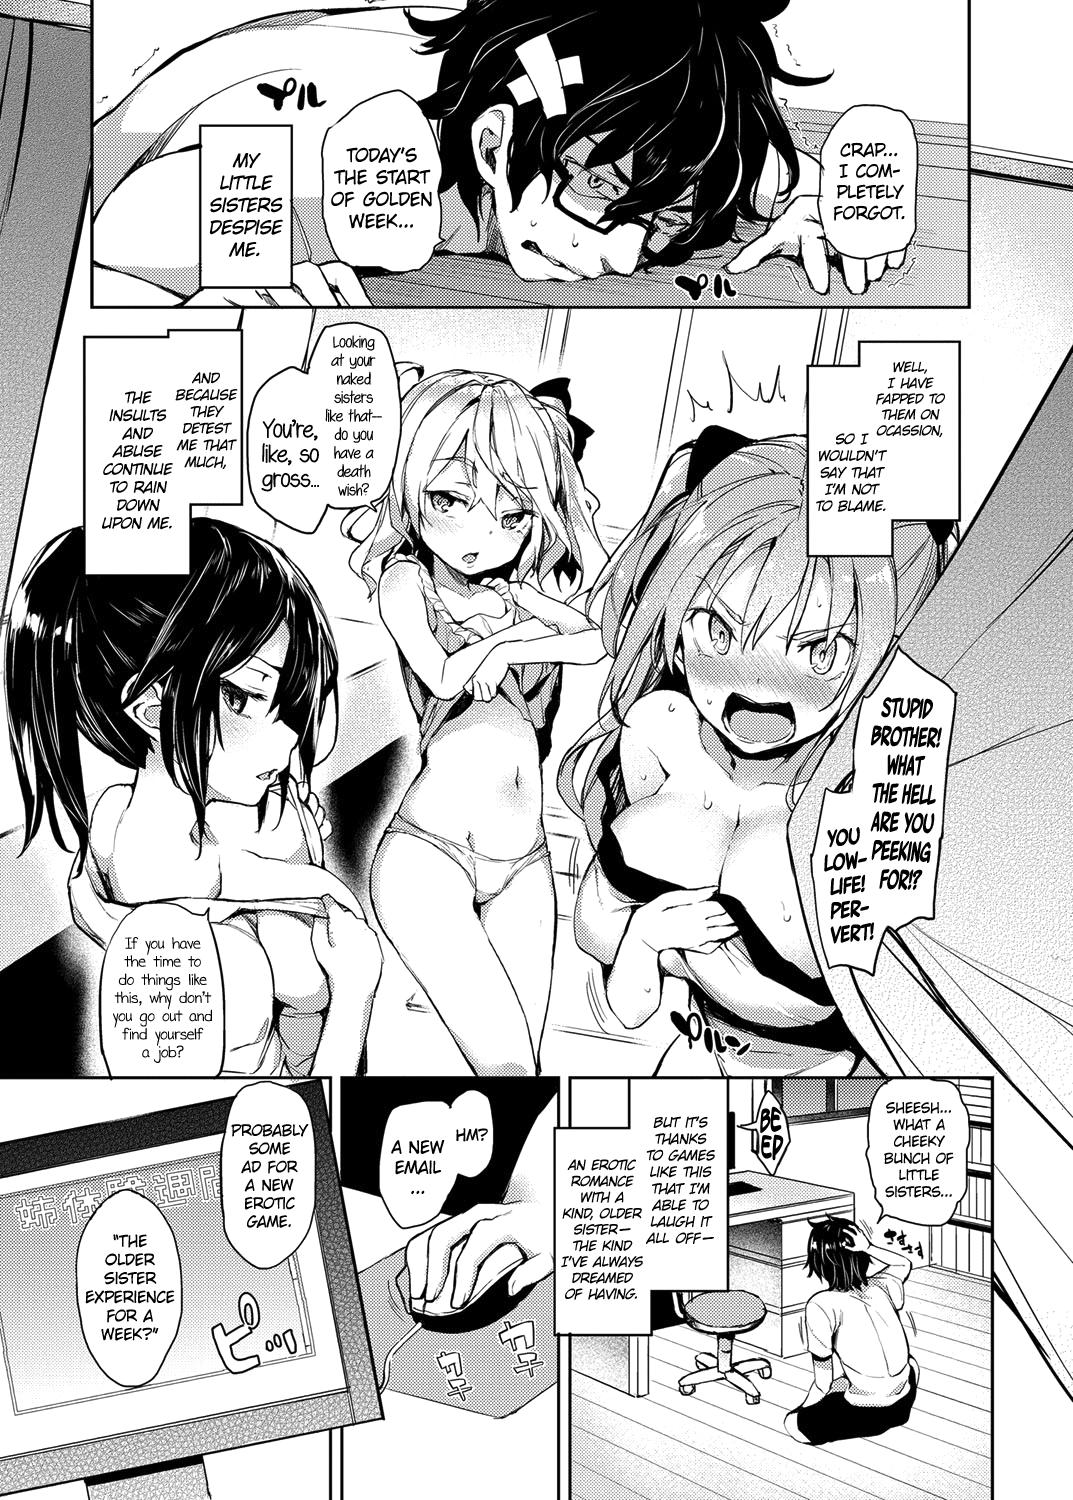 Ane Taiken Shuukan | The Older Sister Experience for a Week Ch. 1-2 2